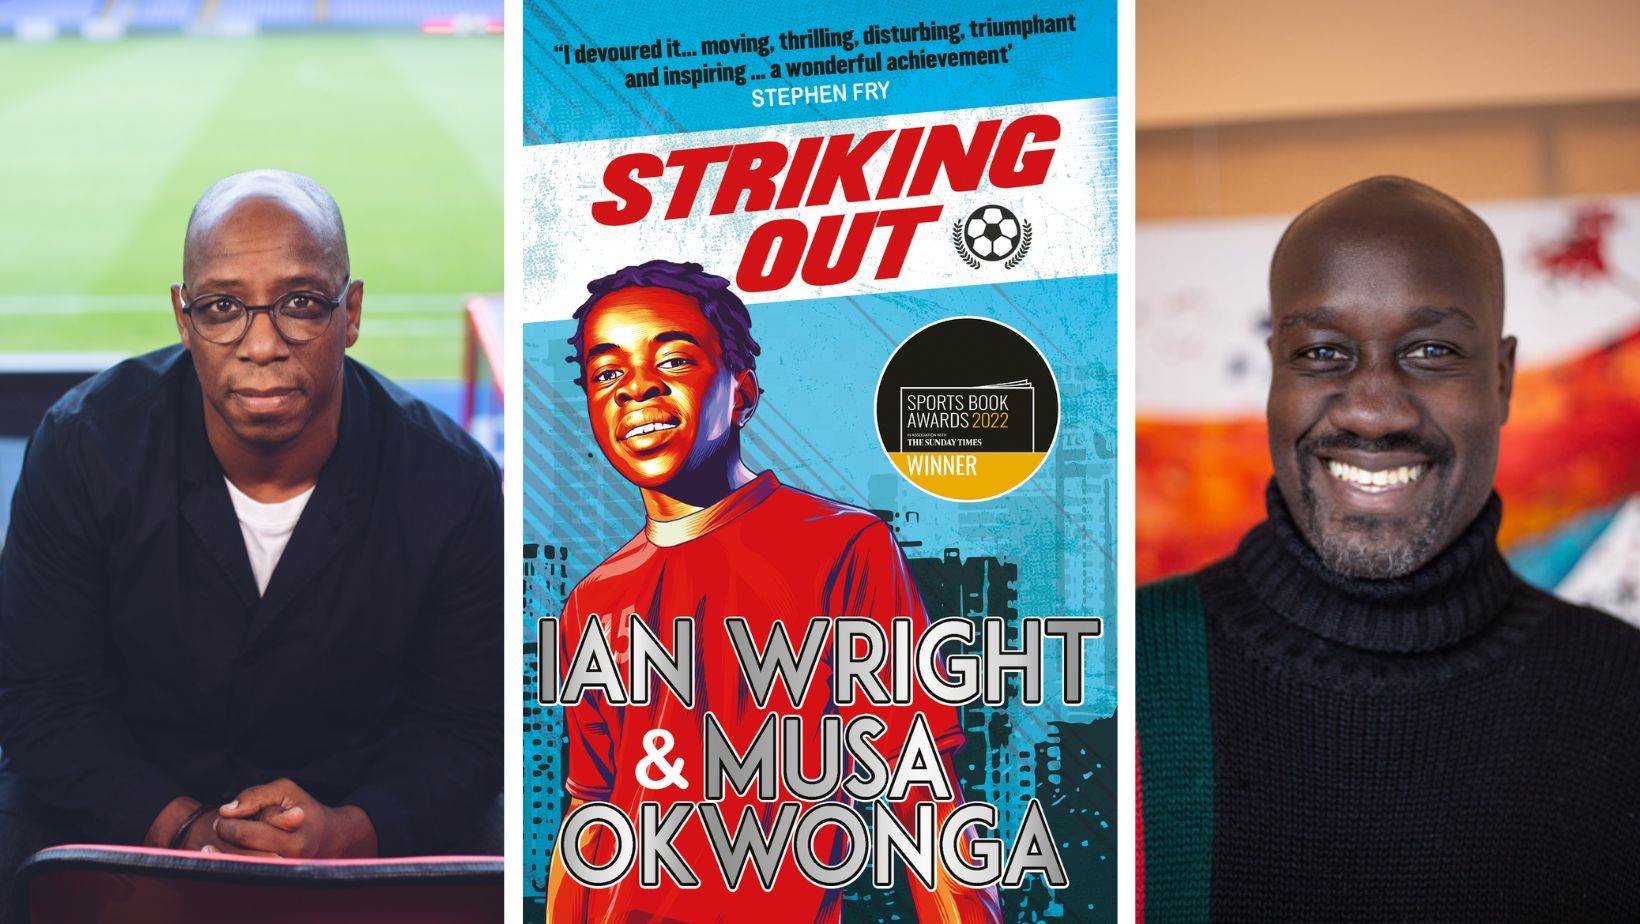 Ian Wright (left) and Musa Okwonga with the cover of Striking Out